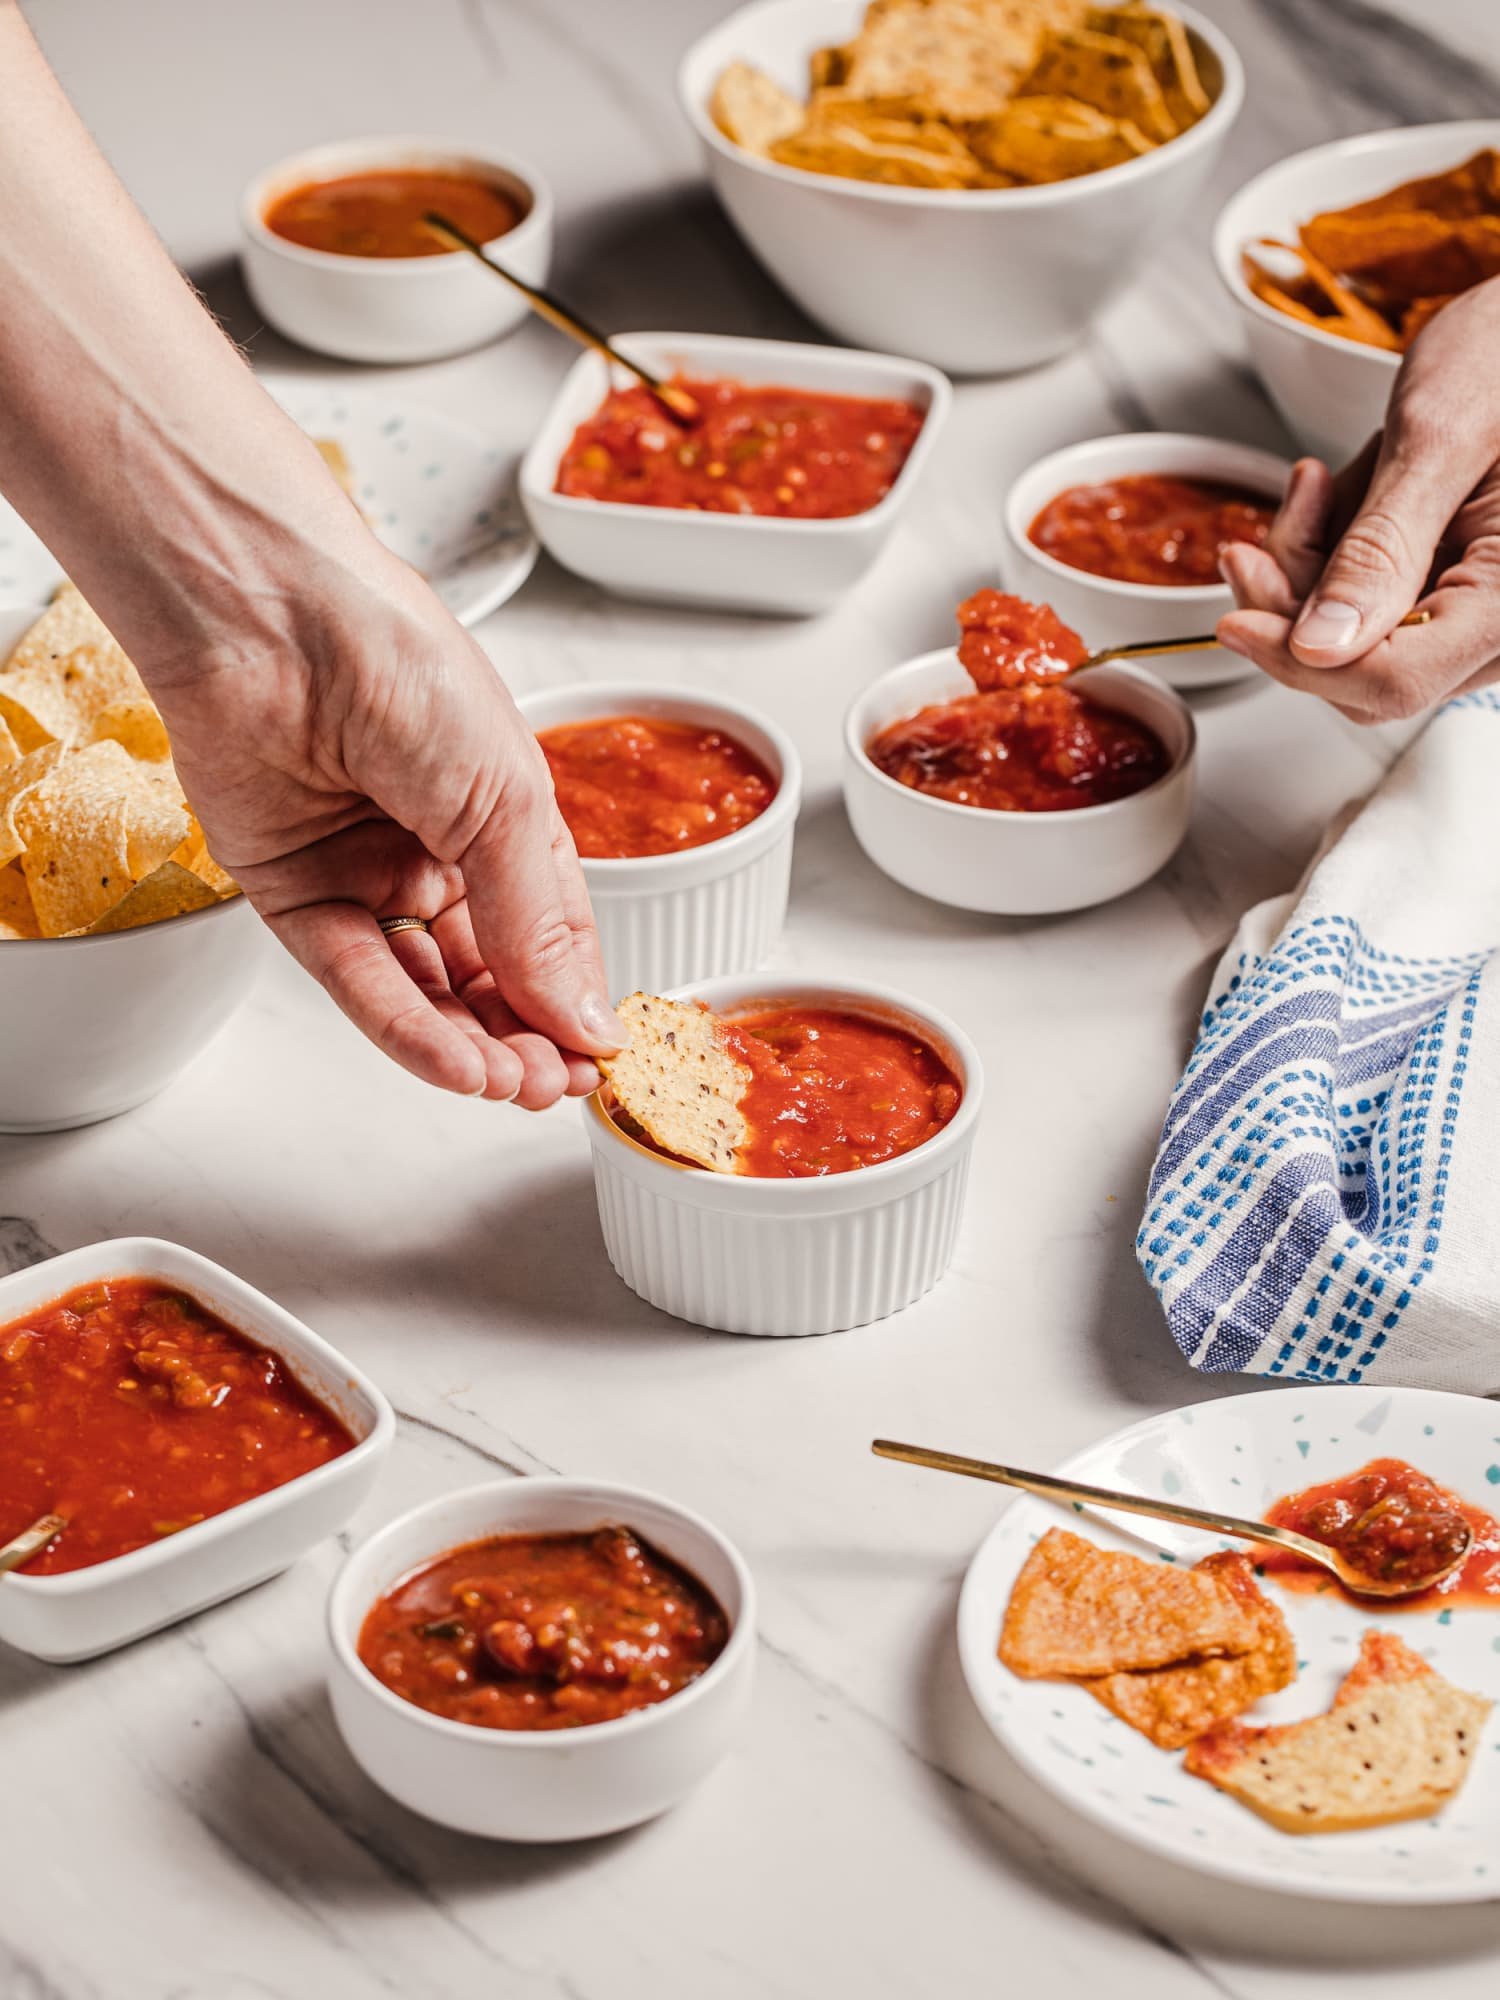 I Tried Every Jarred Salsa I Could Find — And the Winner Transported Me Back to My Childhood